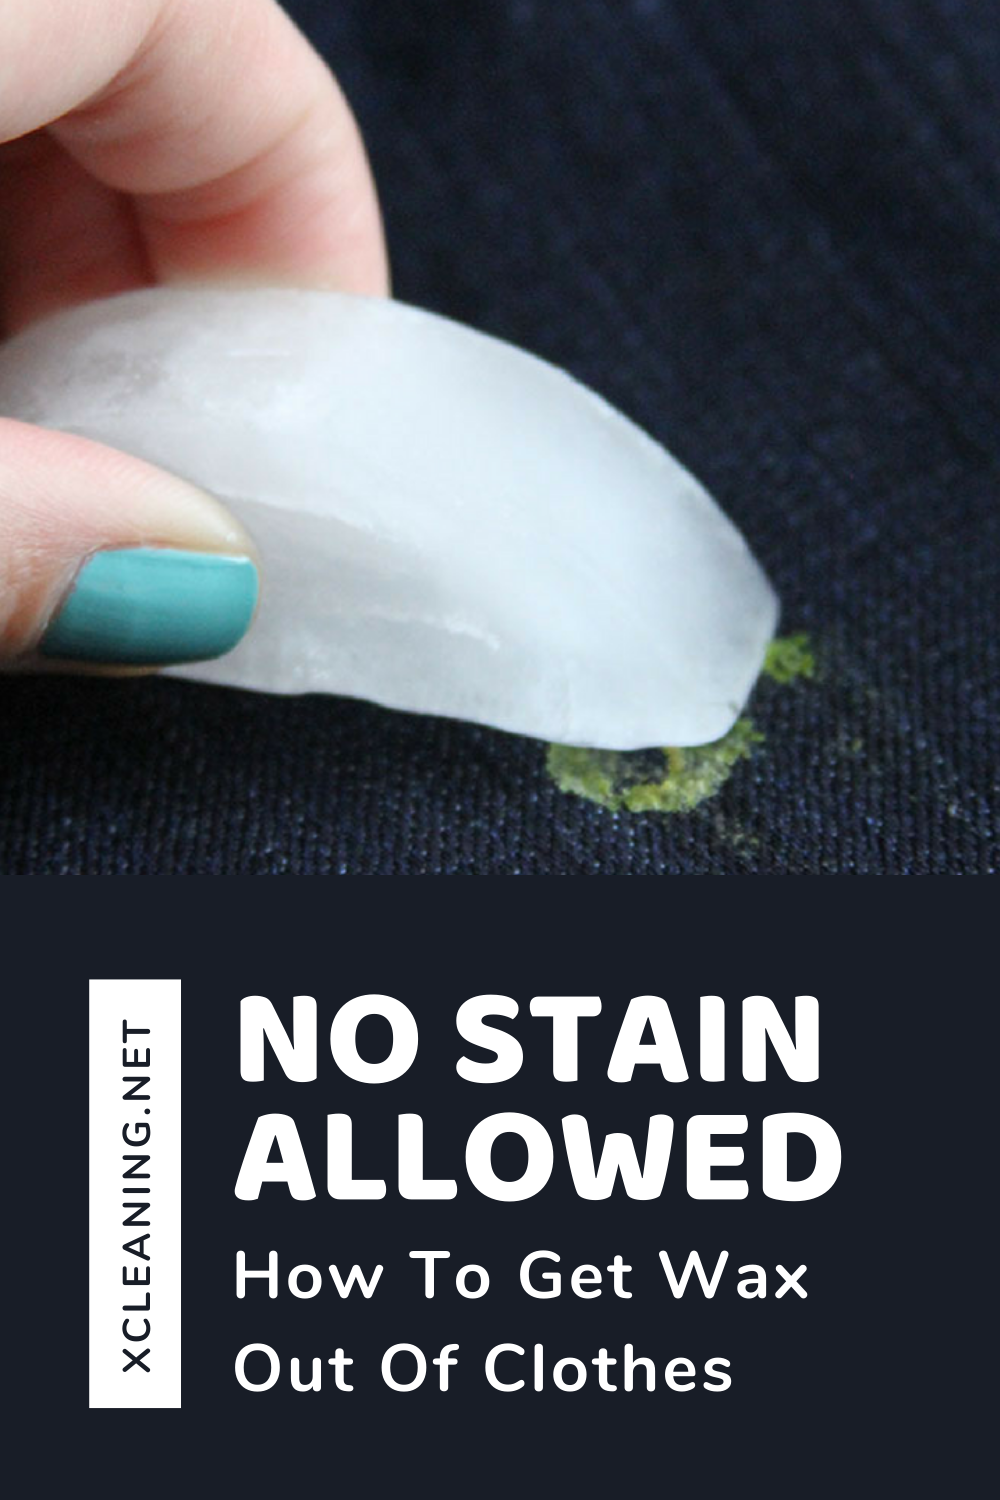 No Stain Allowed How To Get Wax Out Of Clothes